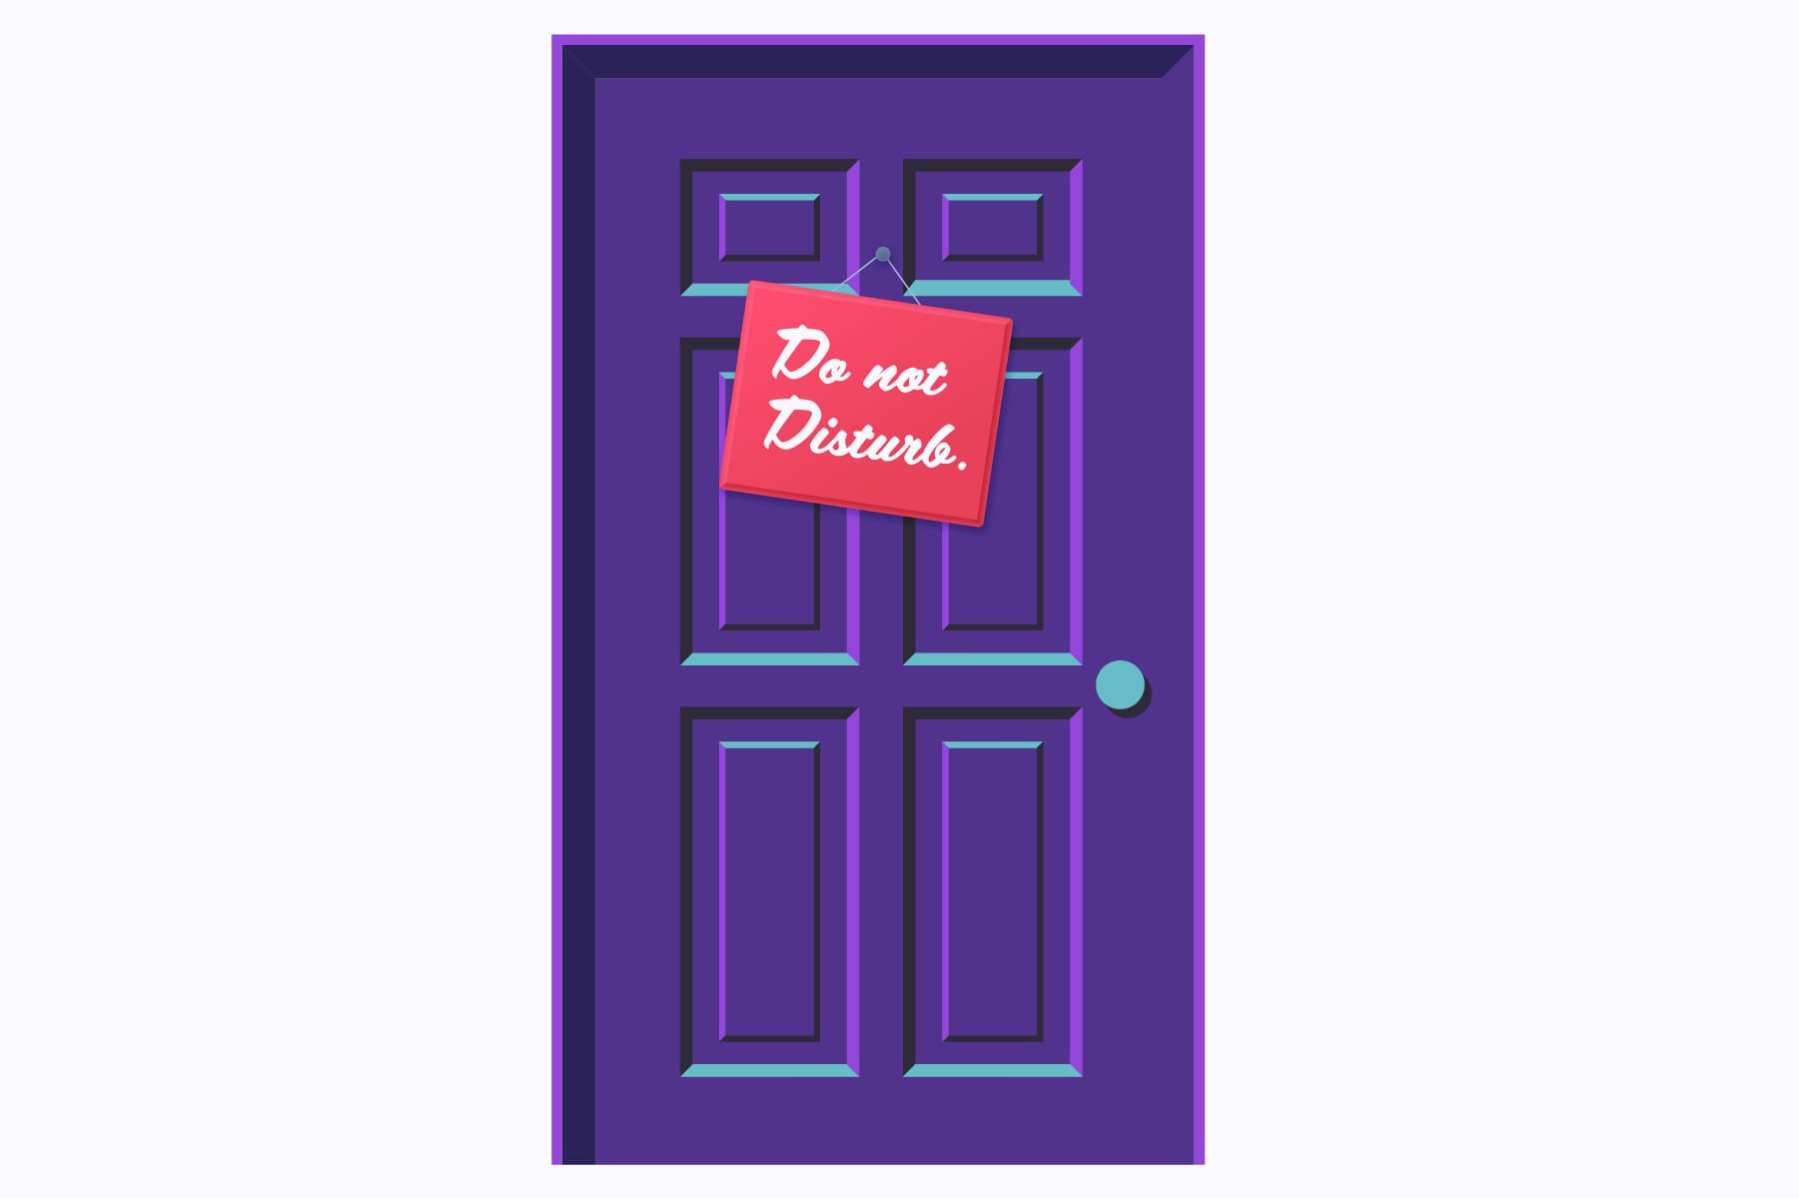 Illustration of a door with a do not disturb sign.